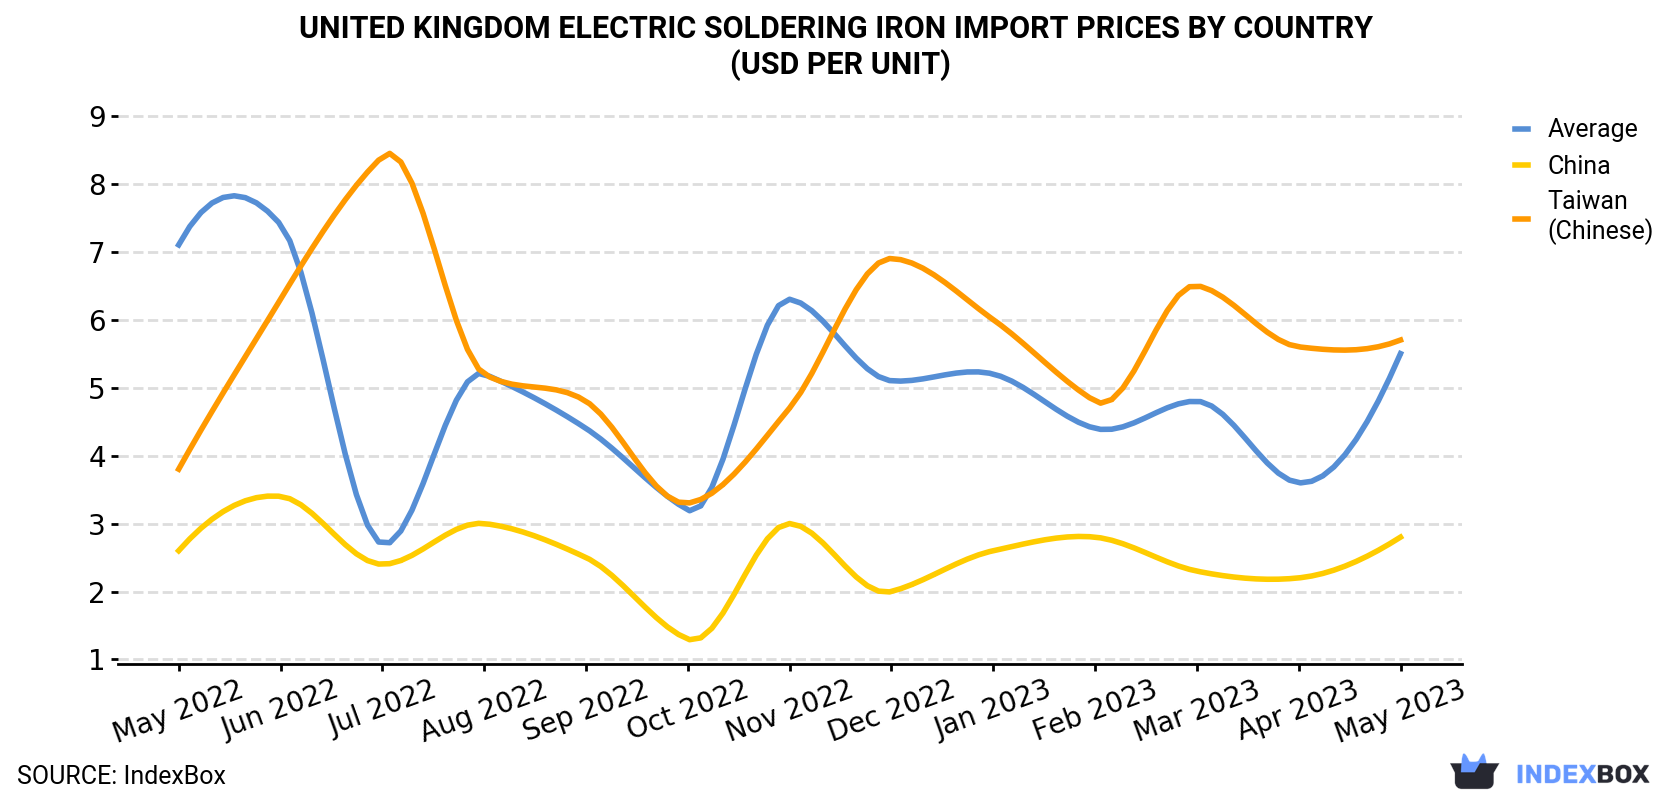 United Kingdom Electric Soldering Iron Import Prices By Country (USD Per Unit)